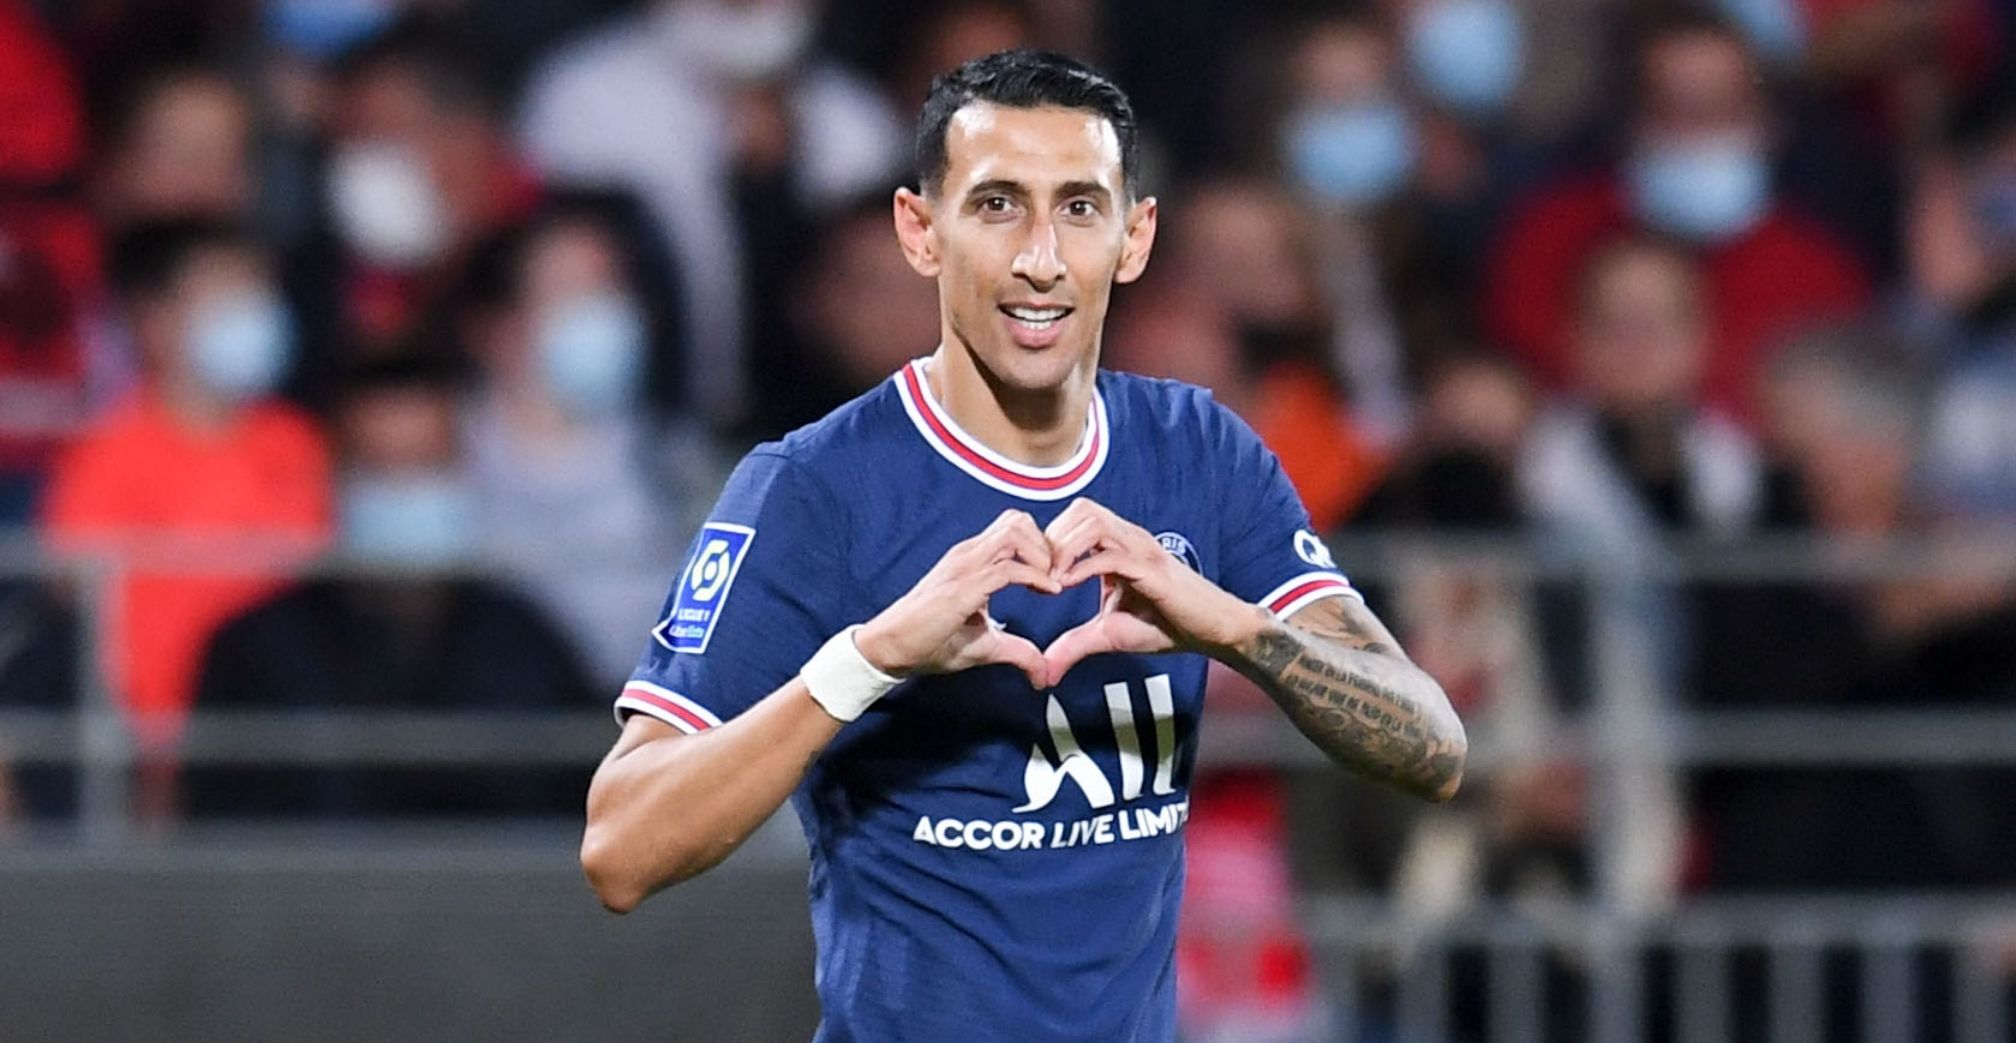 Serie A: Angel Di Maria set to join Juventus on a free transfer, Paul Pogba next in line to sign for the Bianconeri from Manchester United - Check LATEST UPDATES